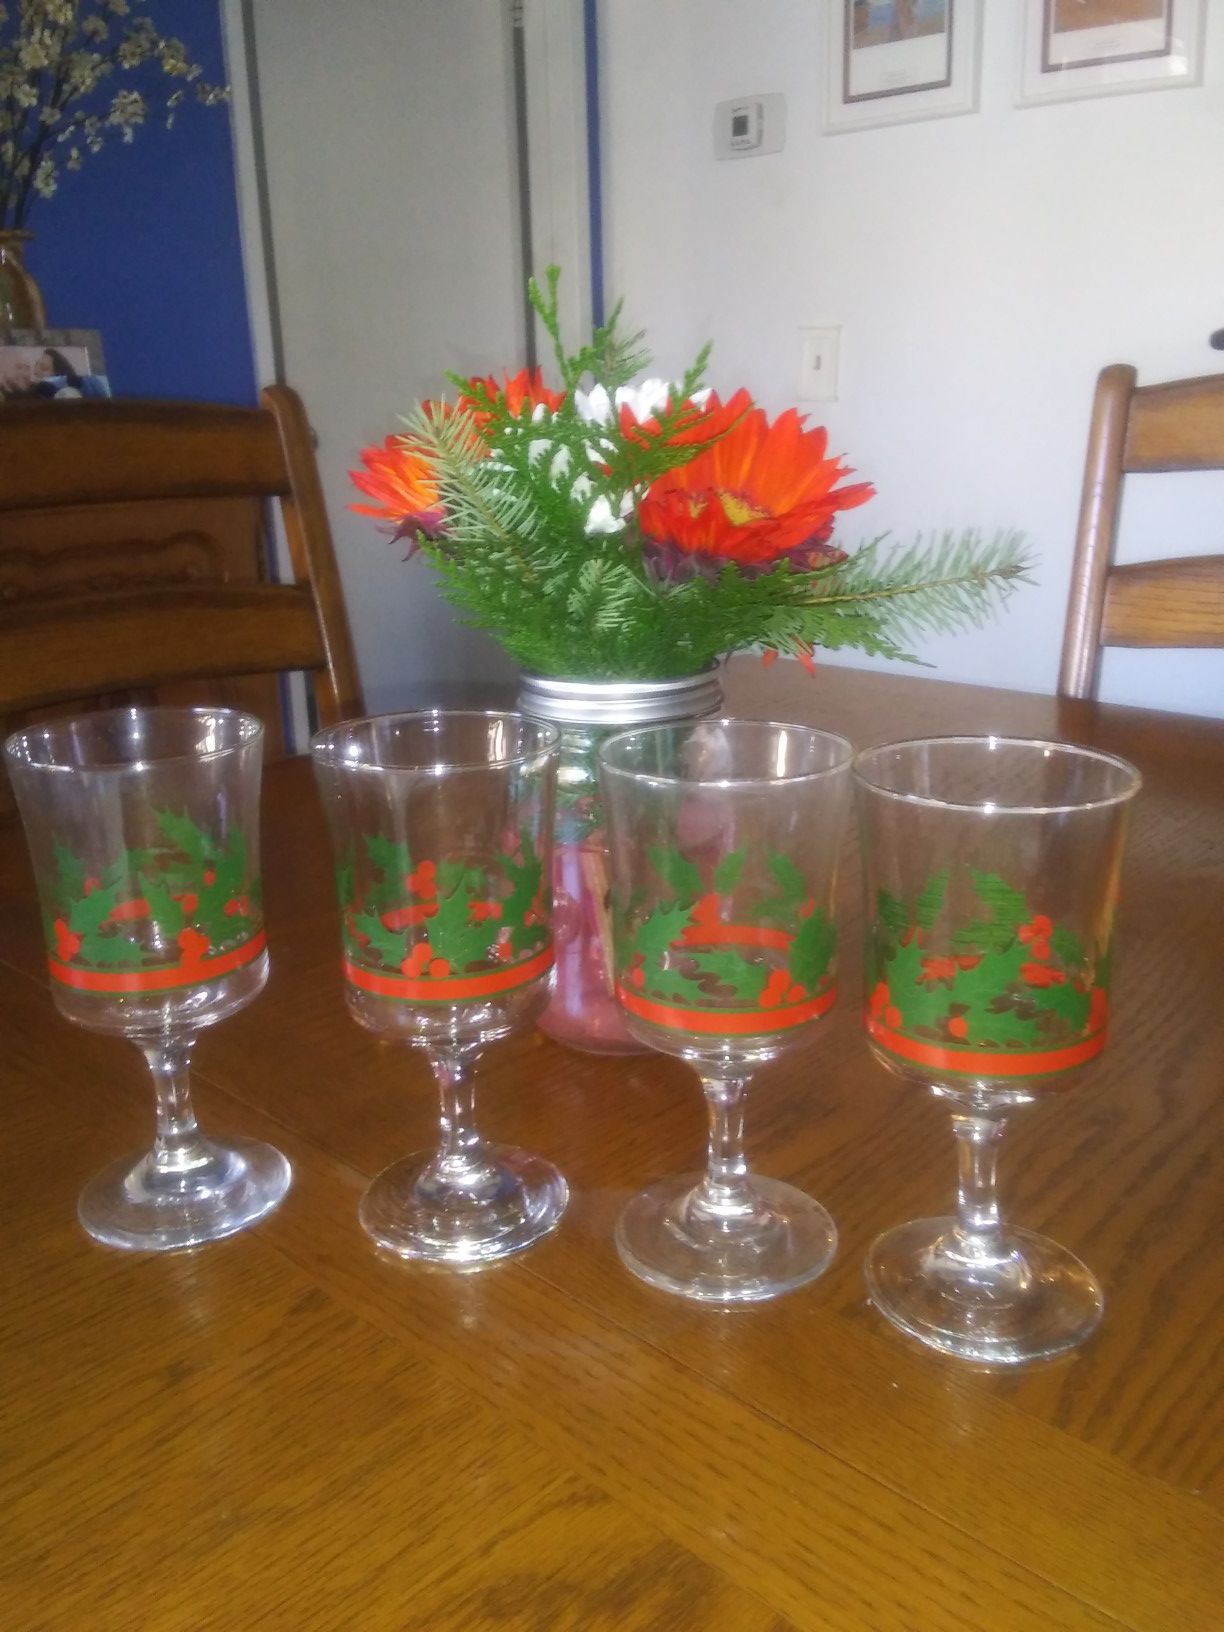 Vintage Christmas Glasses from the "80's"